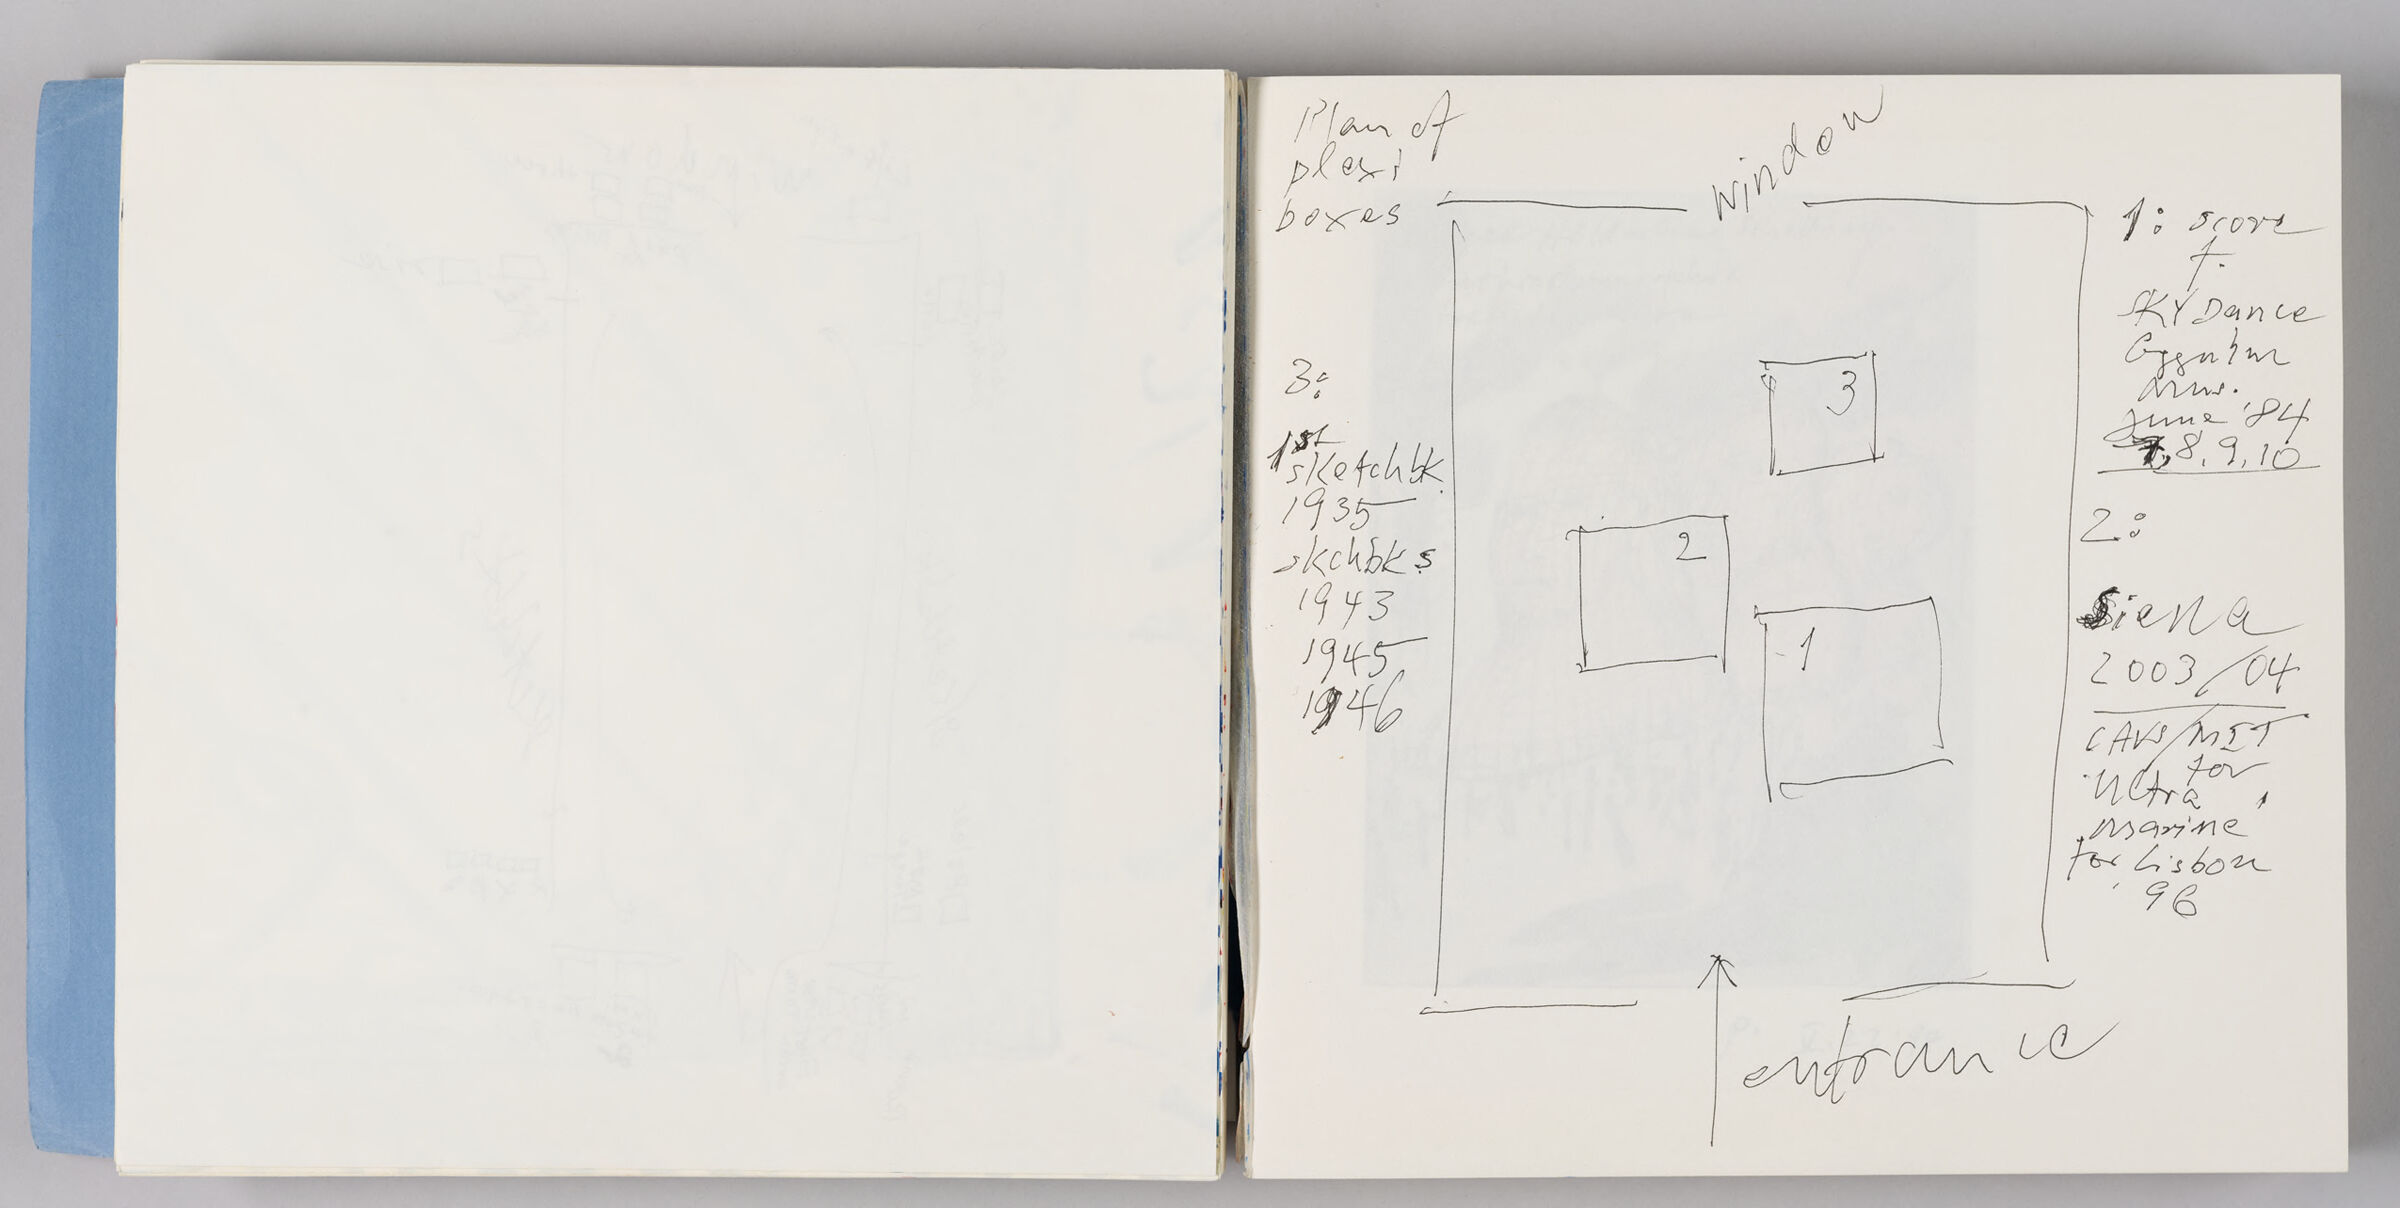 Untitled (Blank, Left Page); Untitled (Layout For Gallery Show Of Sketchbooks, Right Page)
